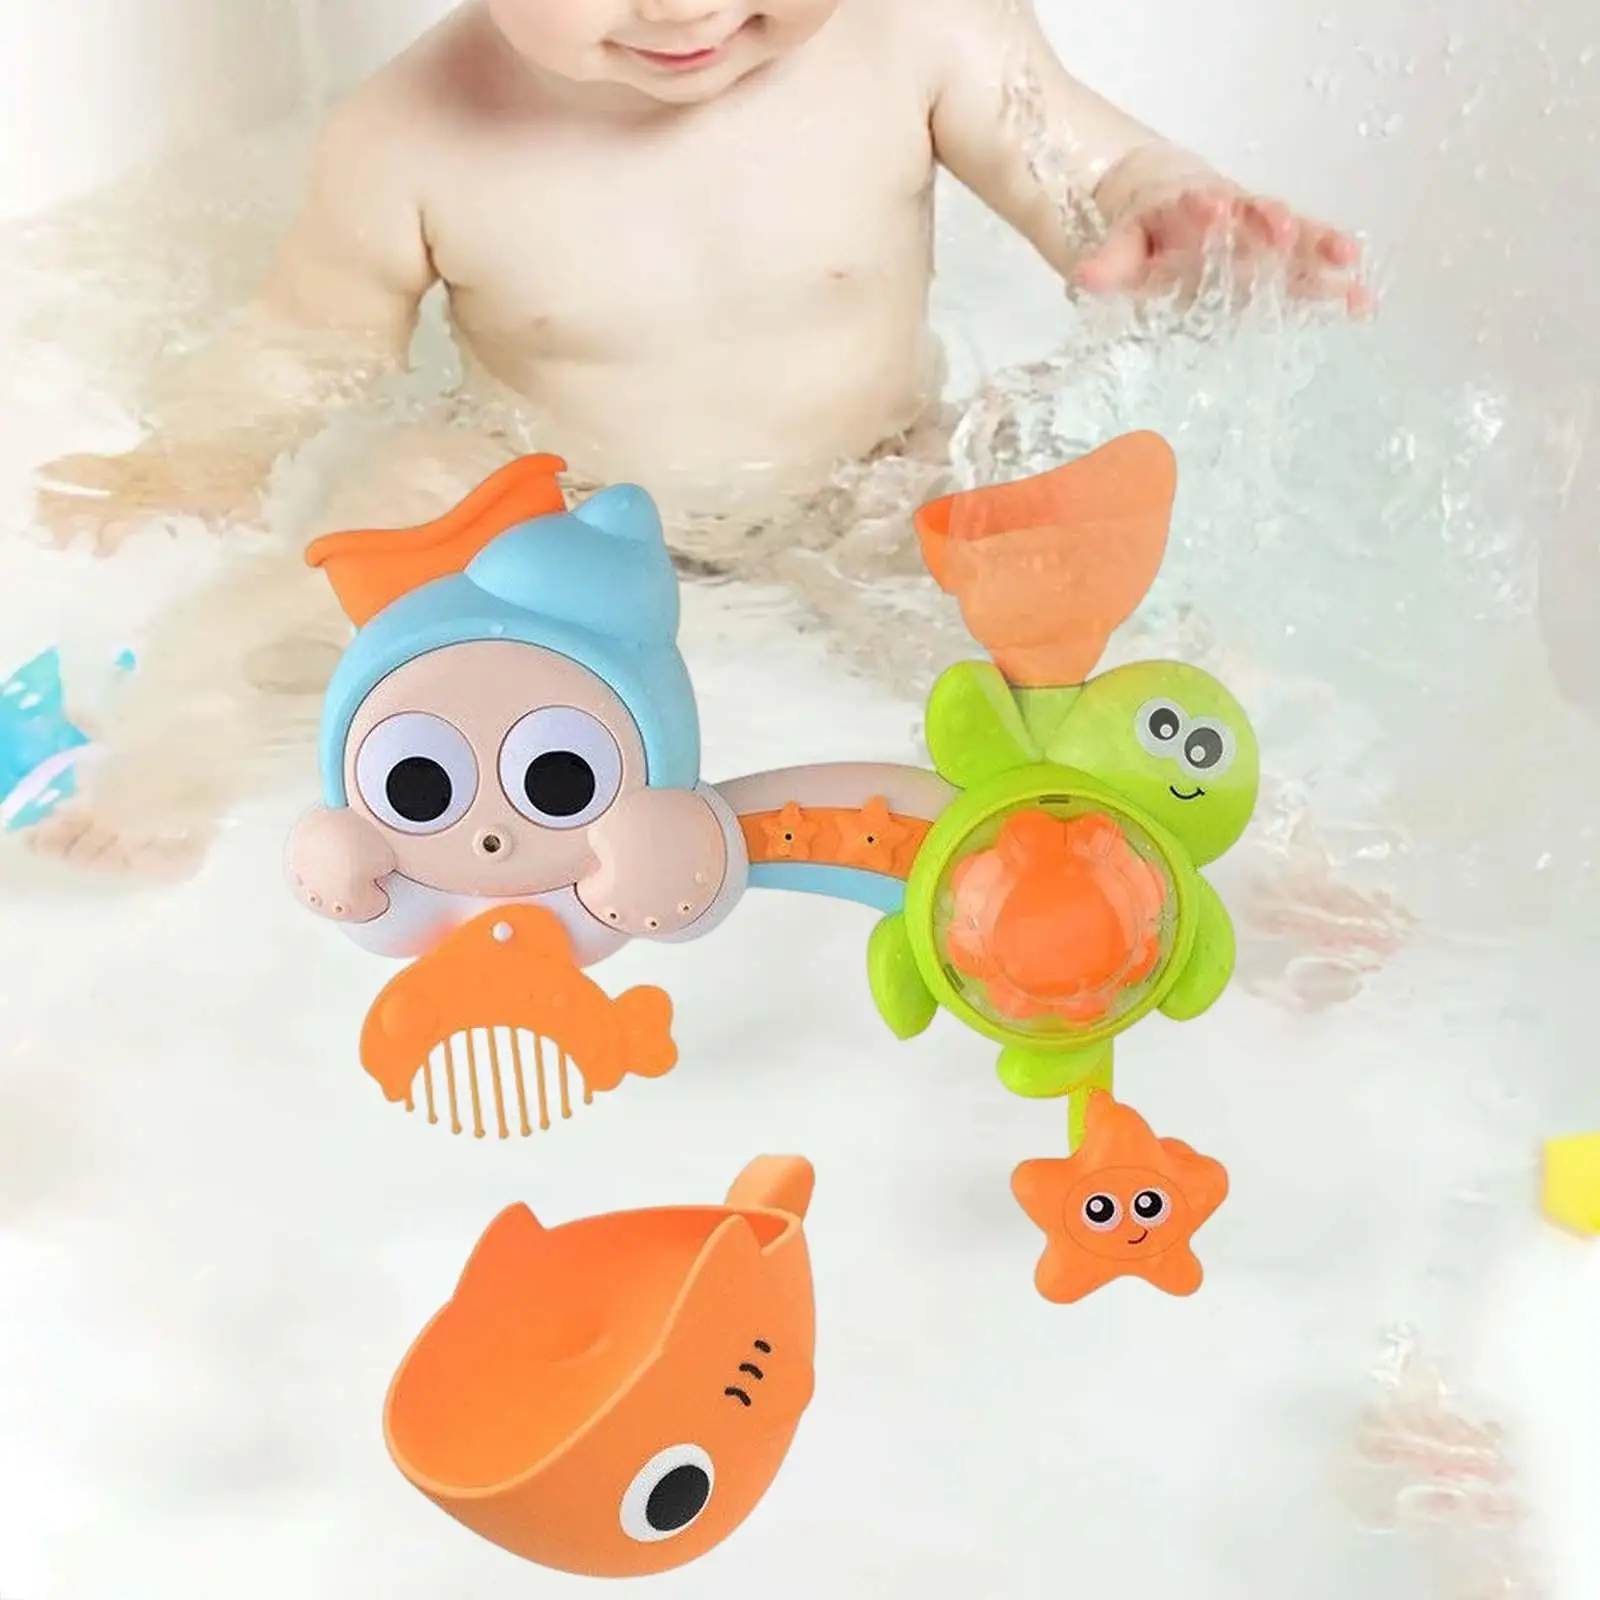 

Bathtub Toy with Suction Cup Outdoor Activities Toy Sensory Development Bath Time Water Toys for Preschool Girls Birthday Gifts